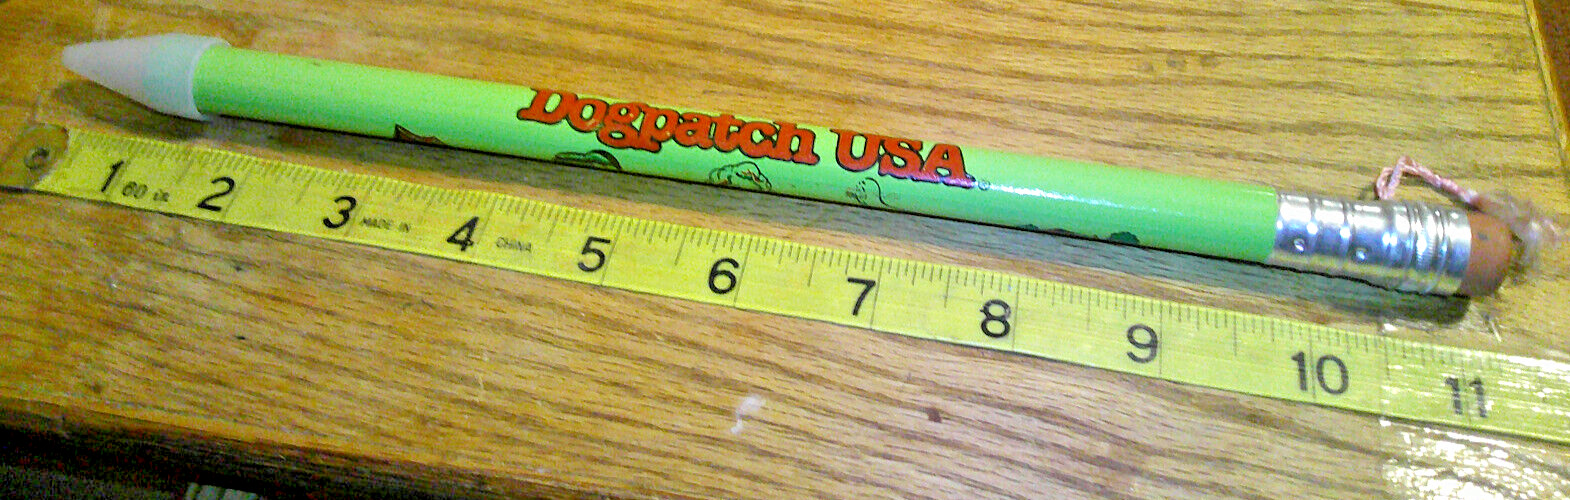 Vintage Giant Jumbo Souvenir Wooden Pencil Dogpatch U.S.A. Made in Japan